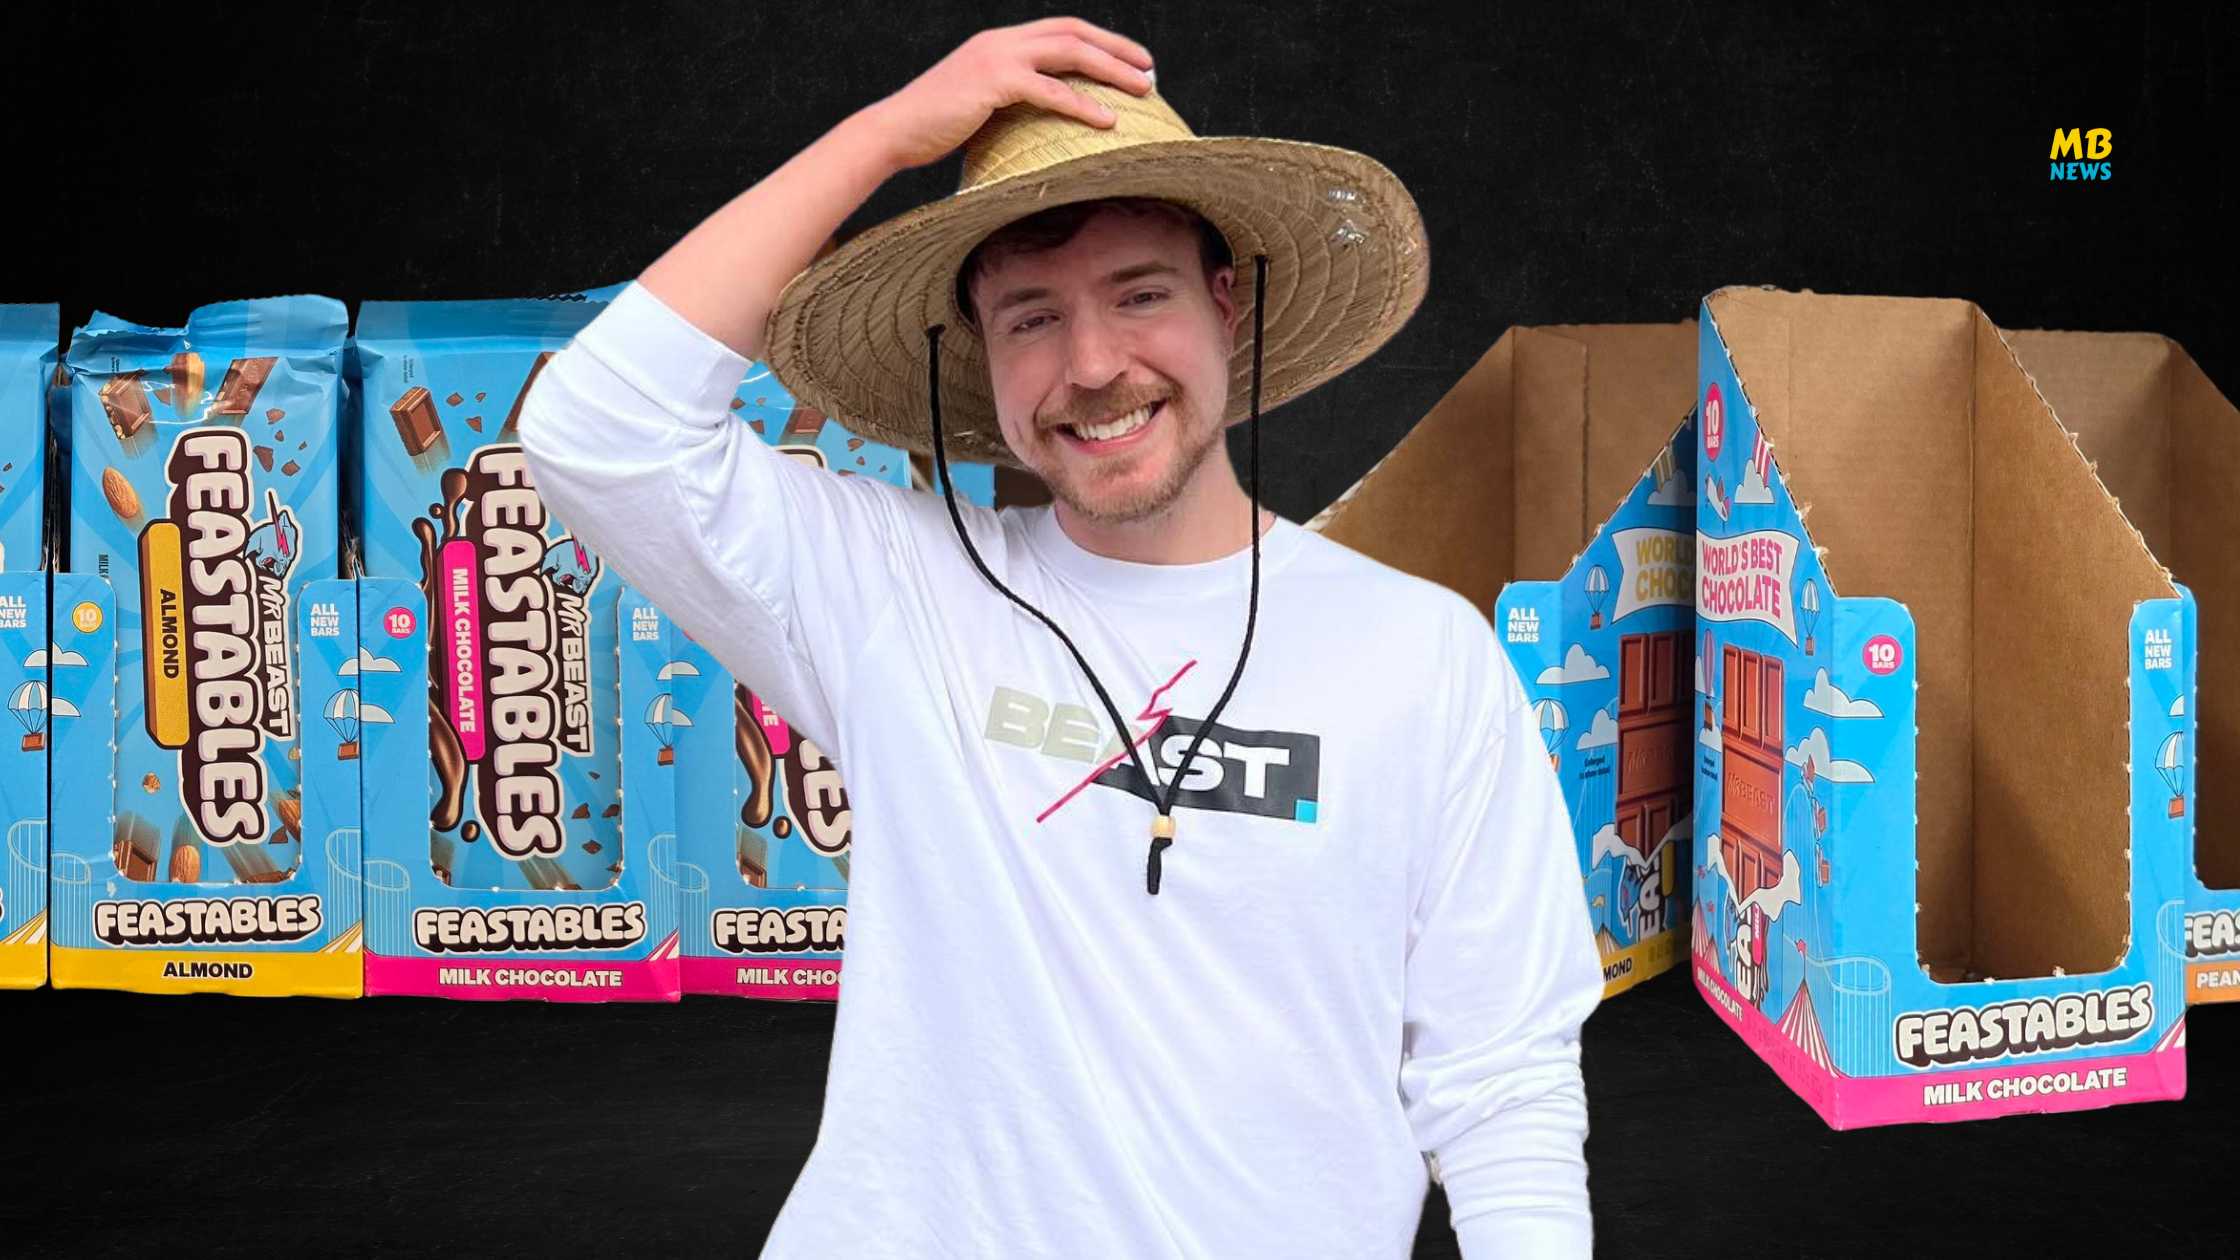 MrBeast Unveils New Feastables in MASSIVE ANNOUNCEMENT The Ultimate Chocolate Experience!